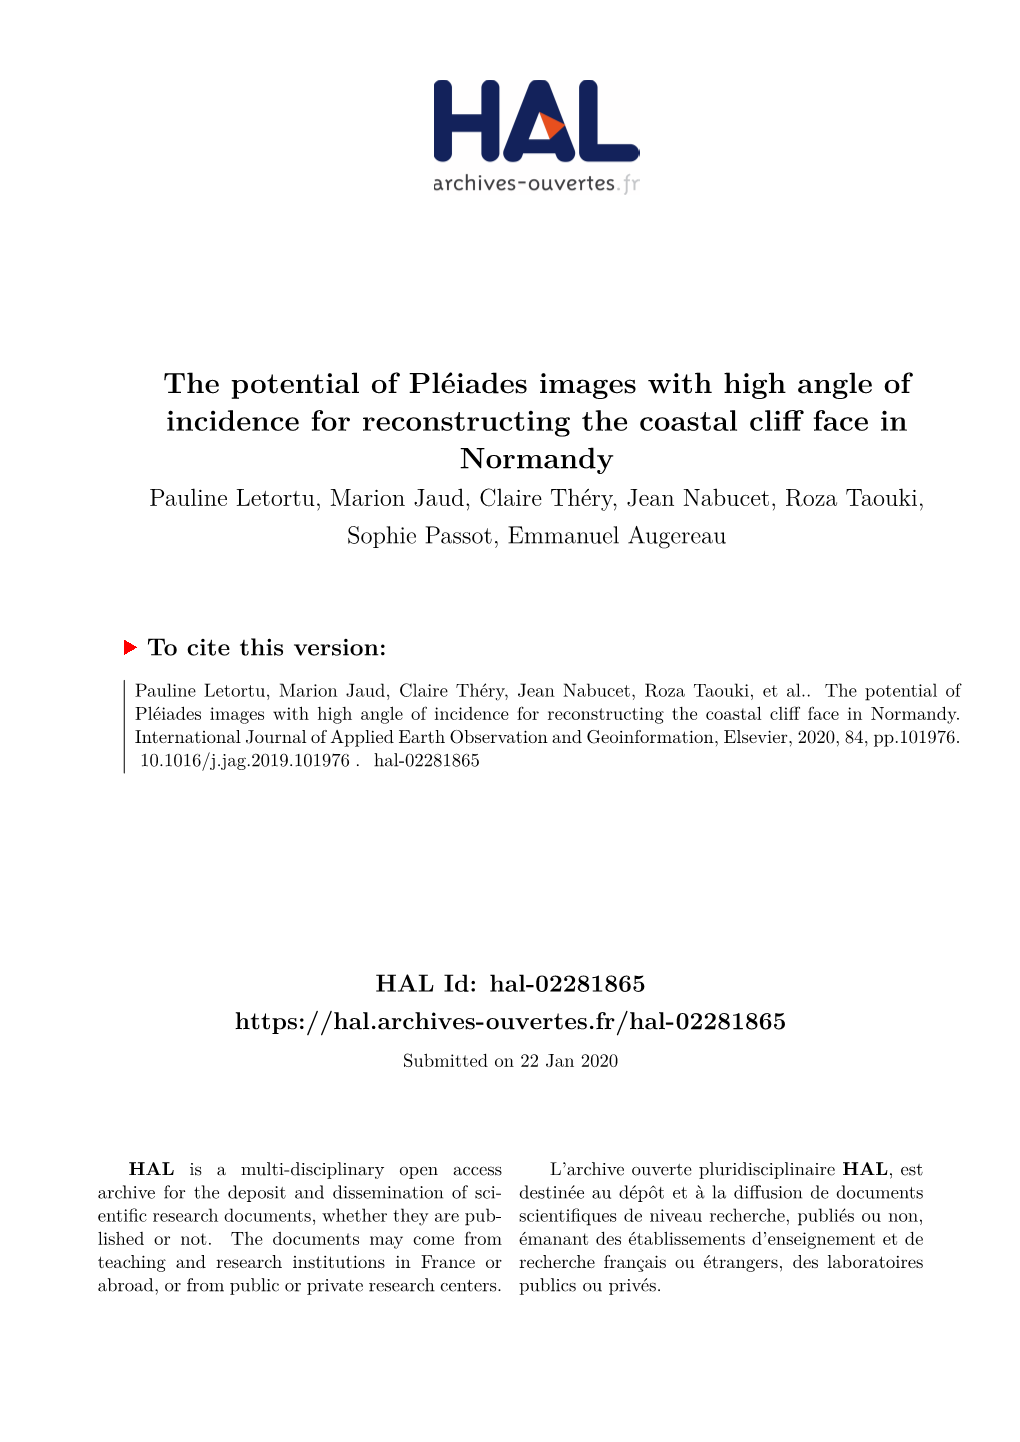 The Potential of Pléiades Images with High Angle of Incidence For